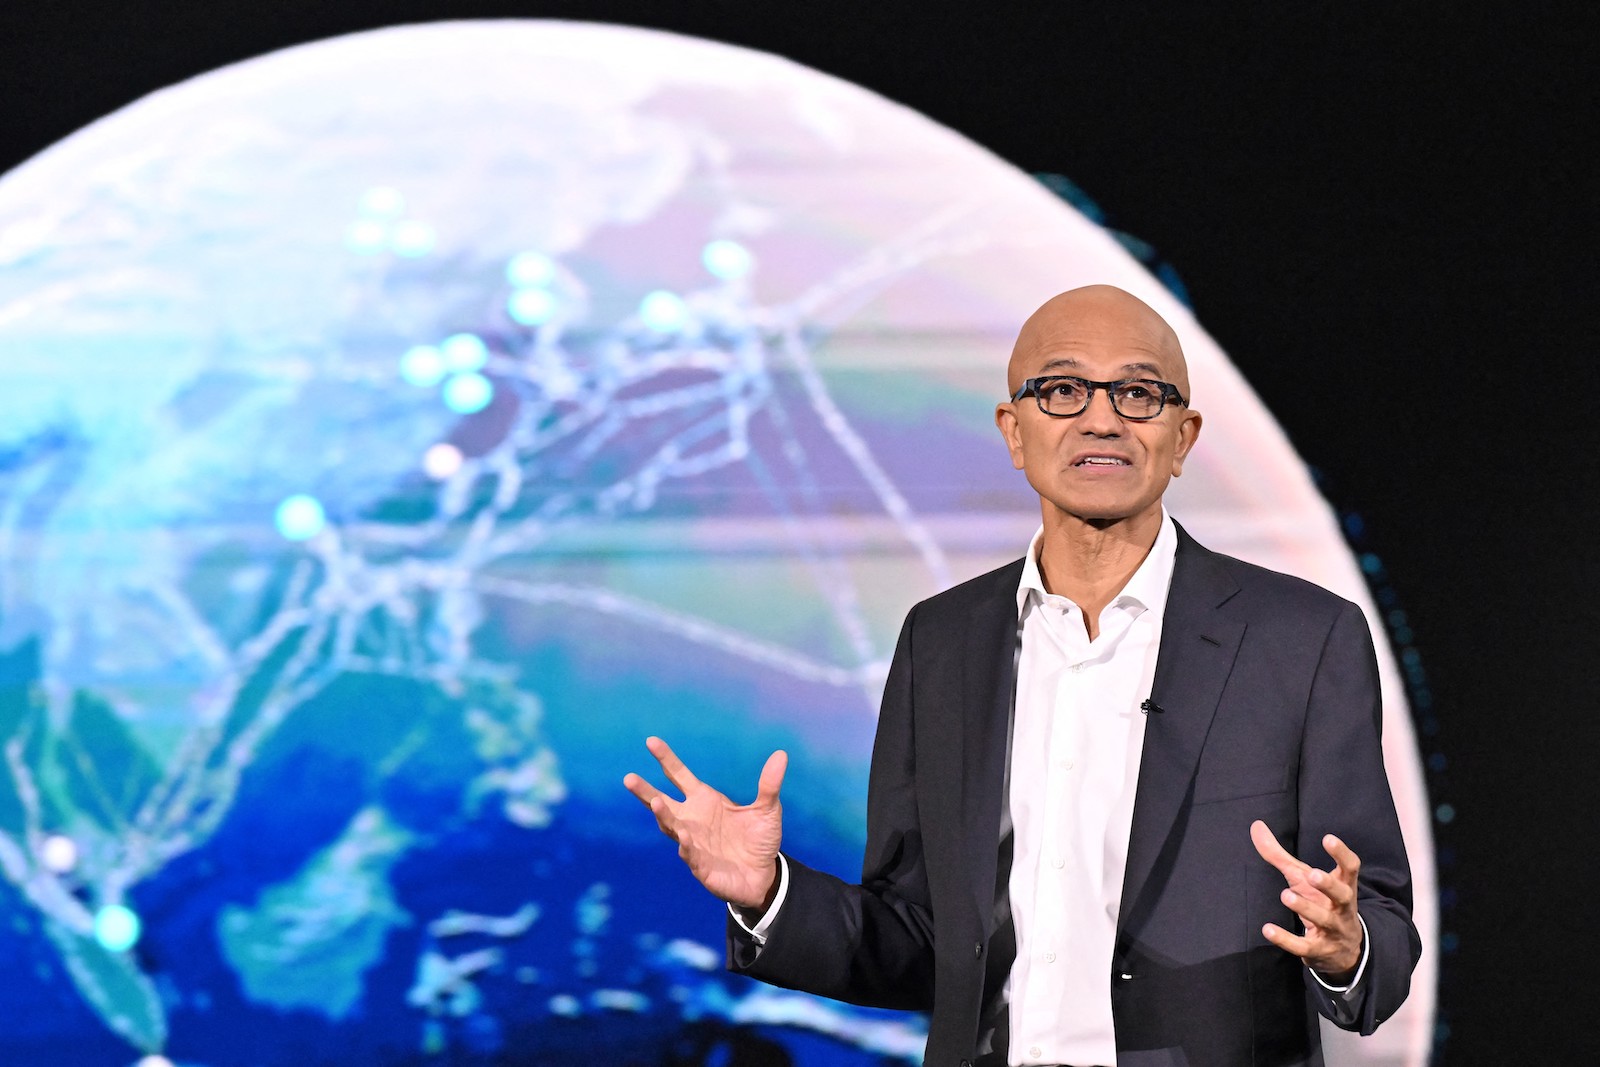 A man in a suit with glasses talks in front of an Earth icon